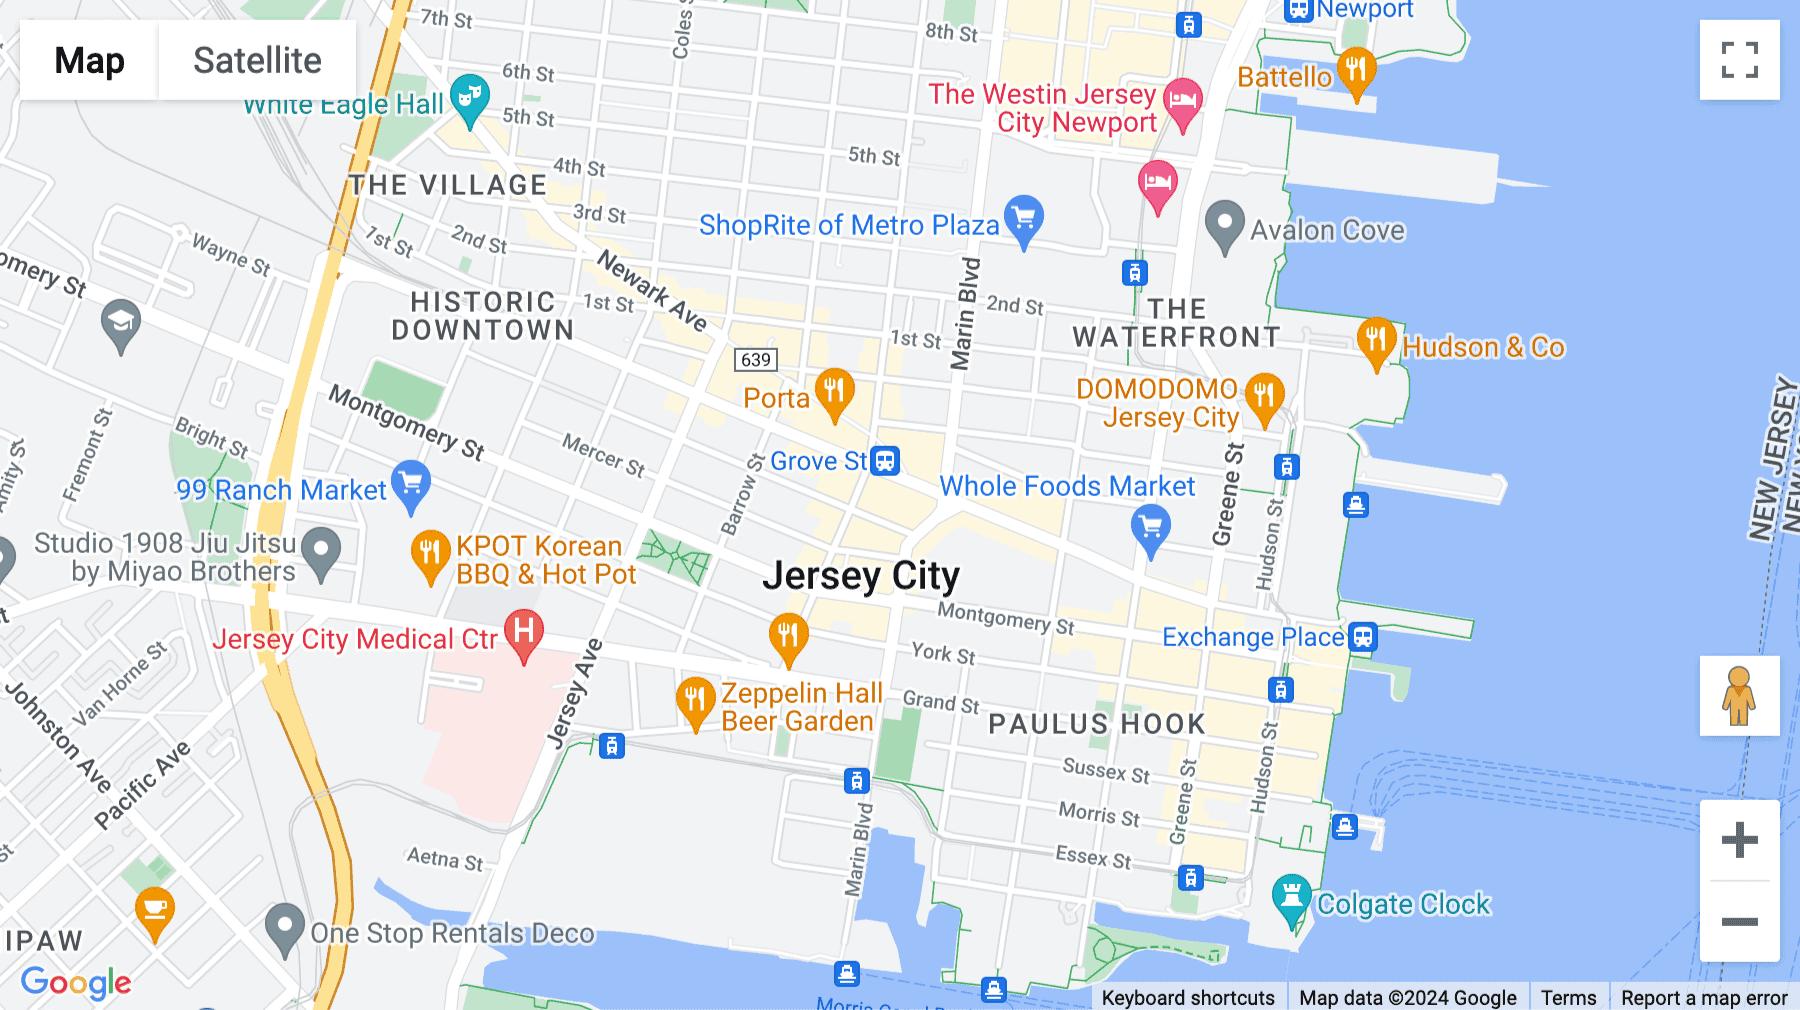 Click for interative map of Downtown, 95 Christopher Columbus Drive/, Grove street, Jersey City